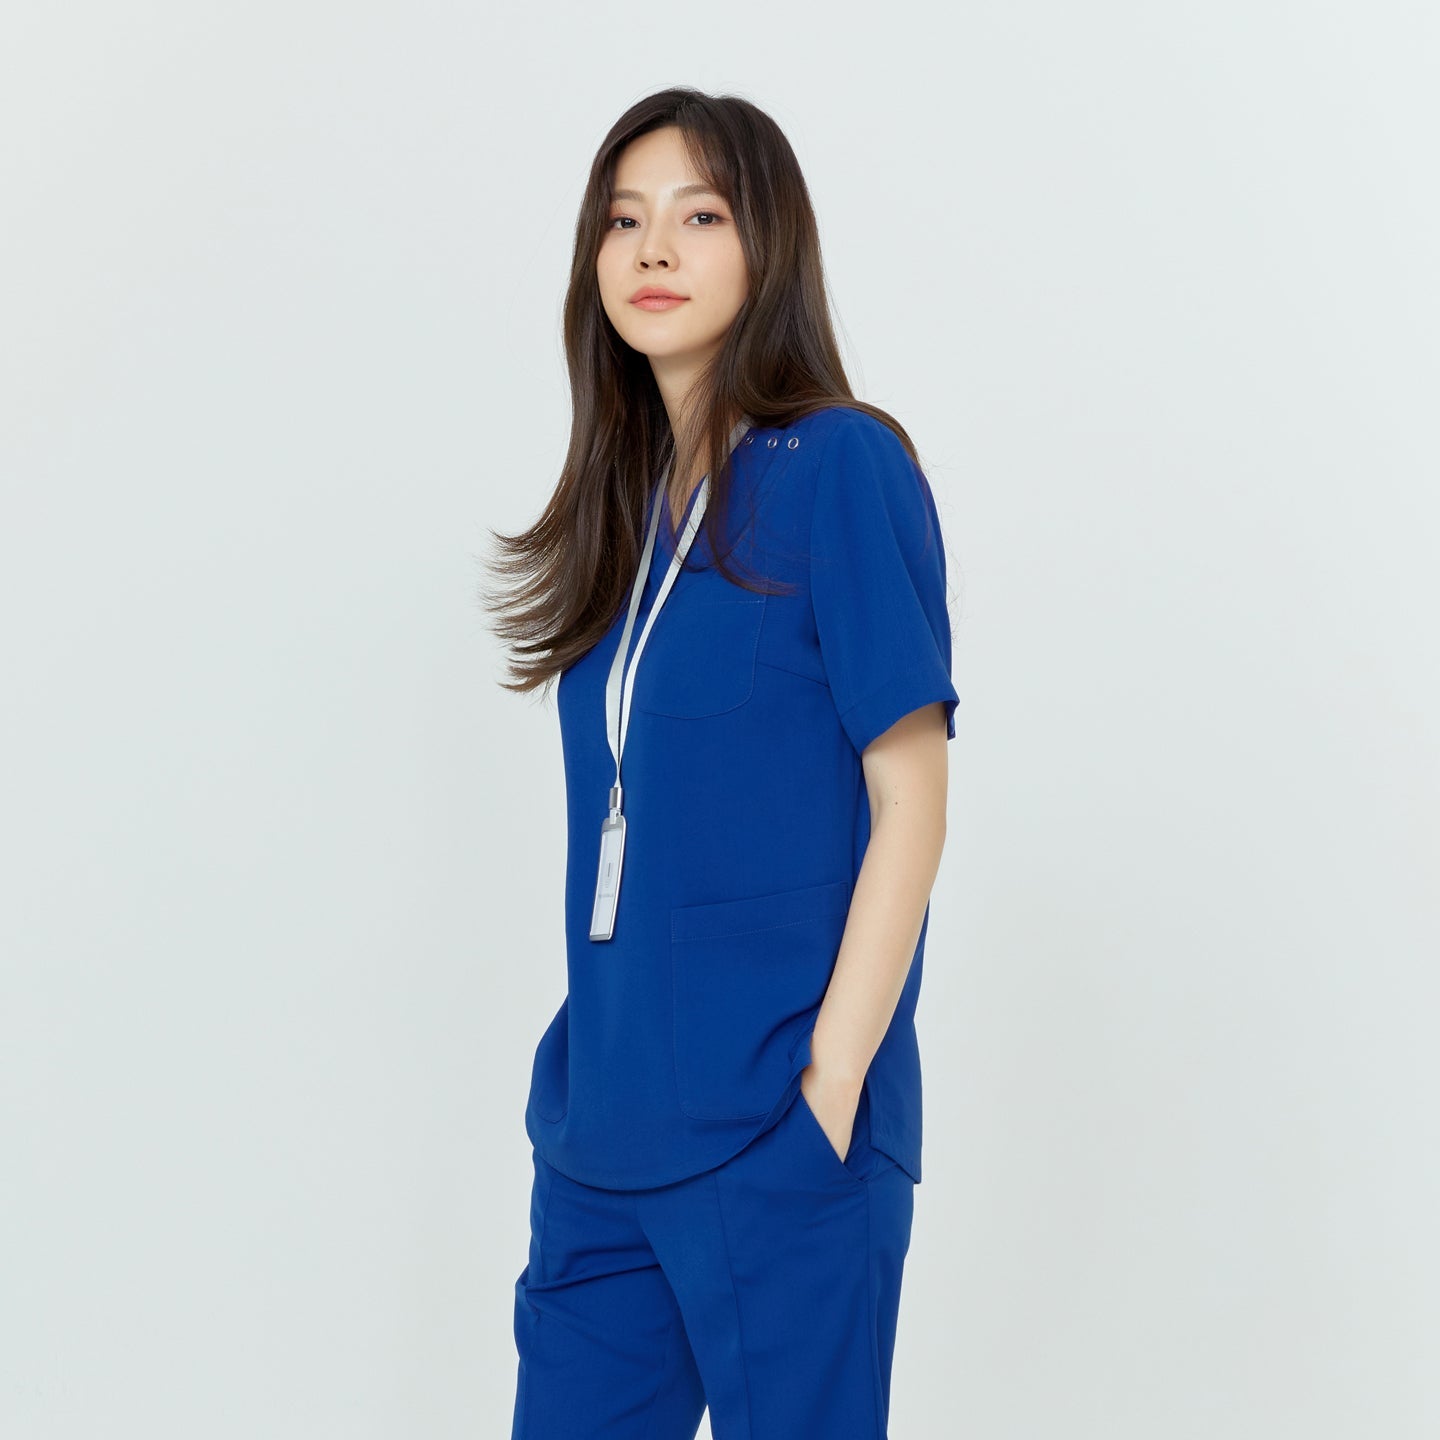 Woman in medical scrubs looking to the side with hands in pockets,Royal Blue